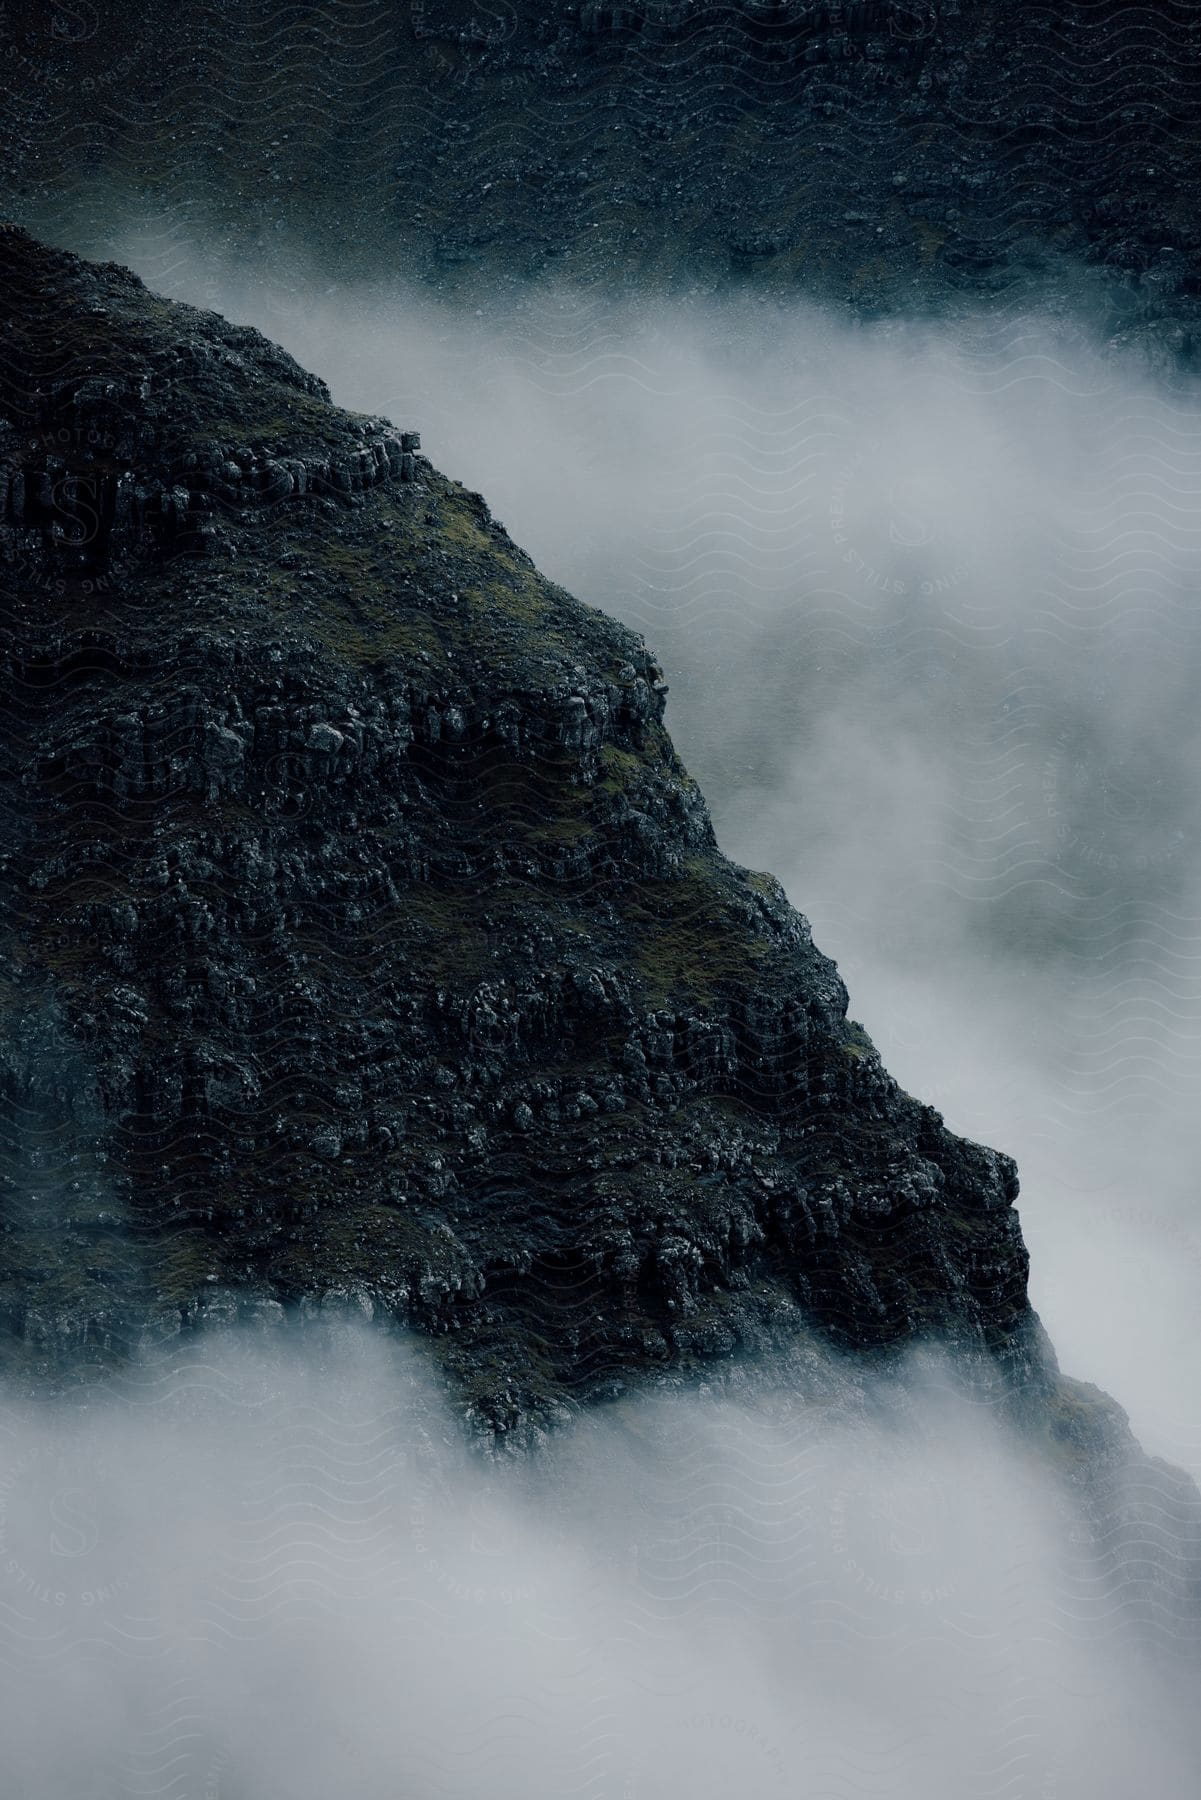 A misty mountain face surrounded by clouds